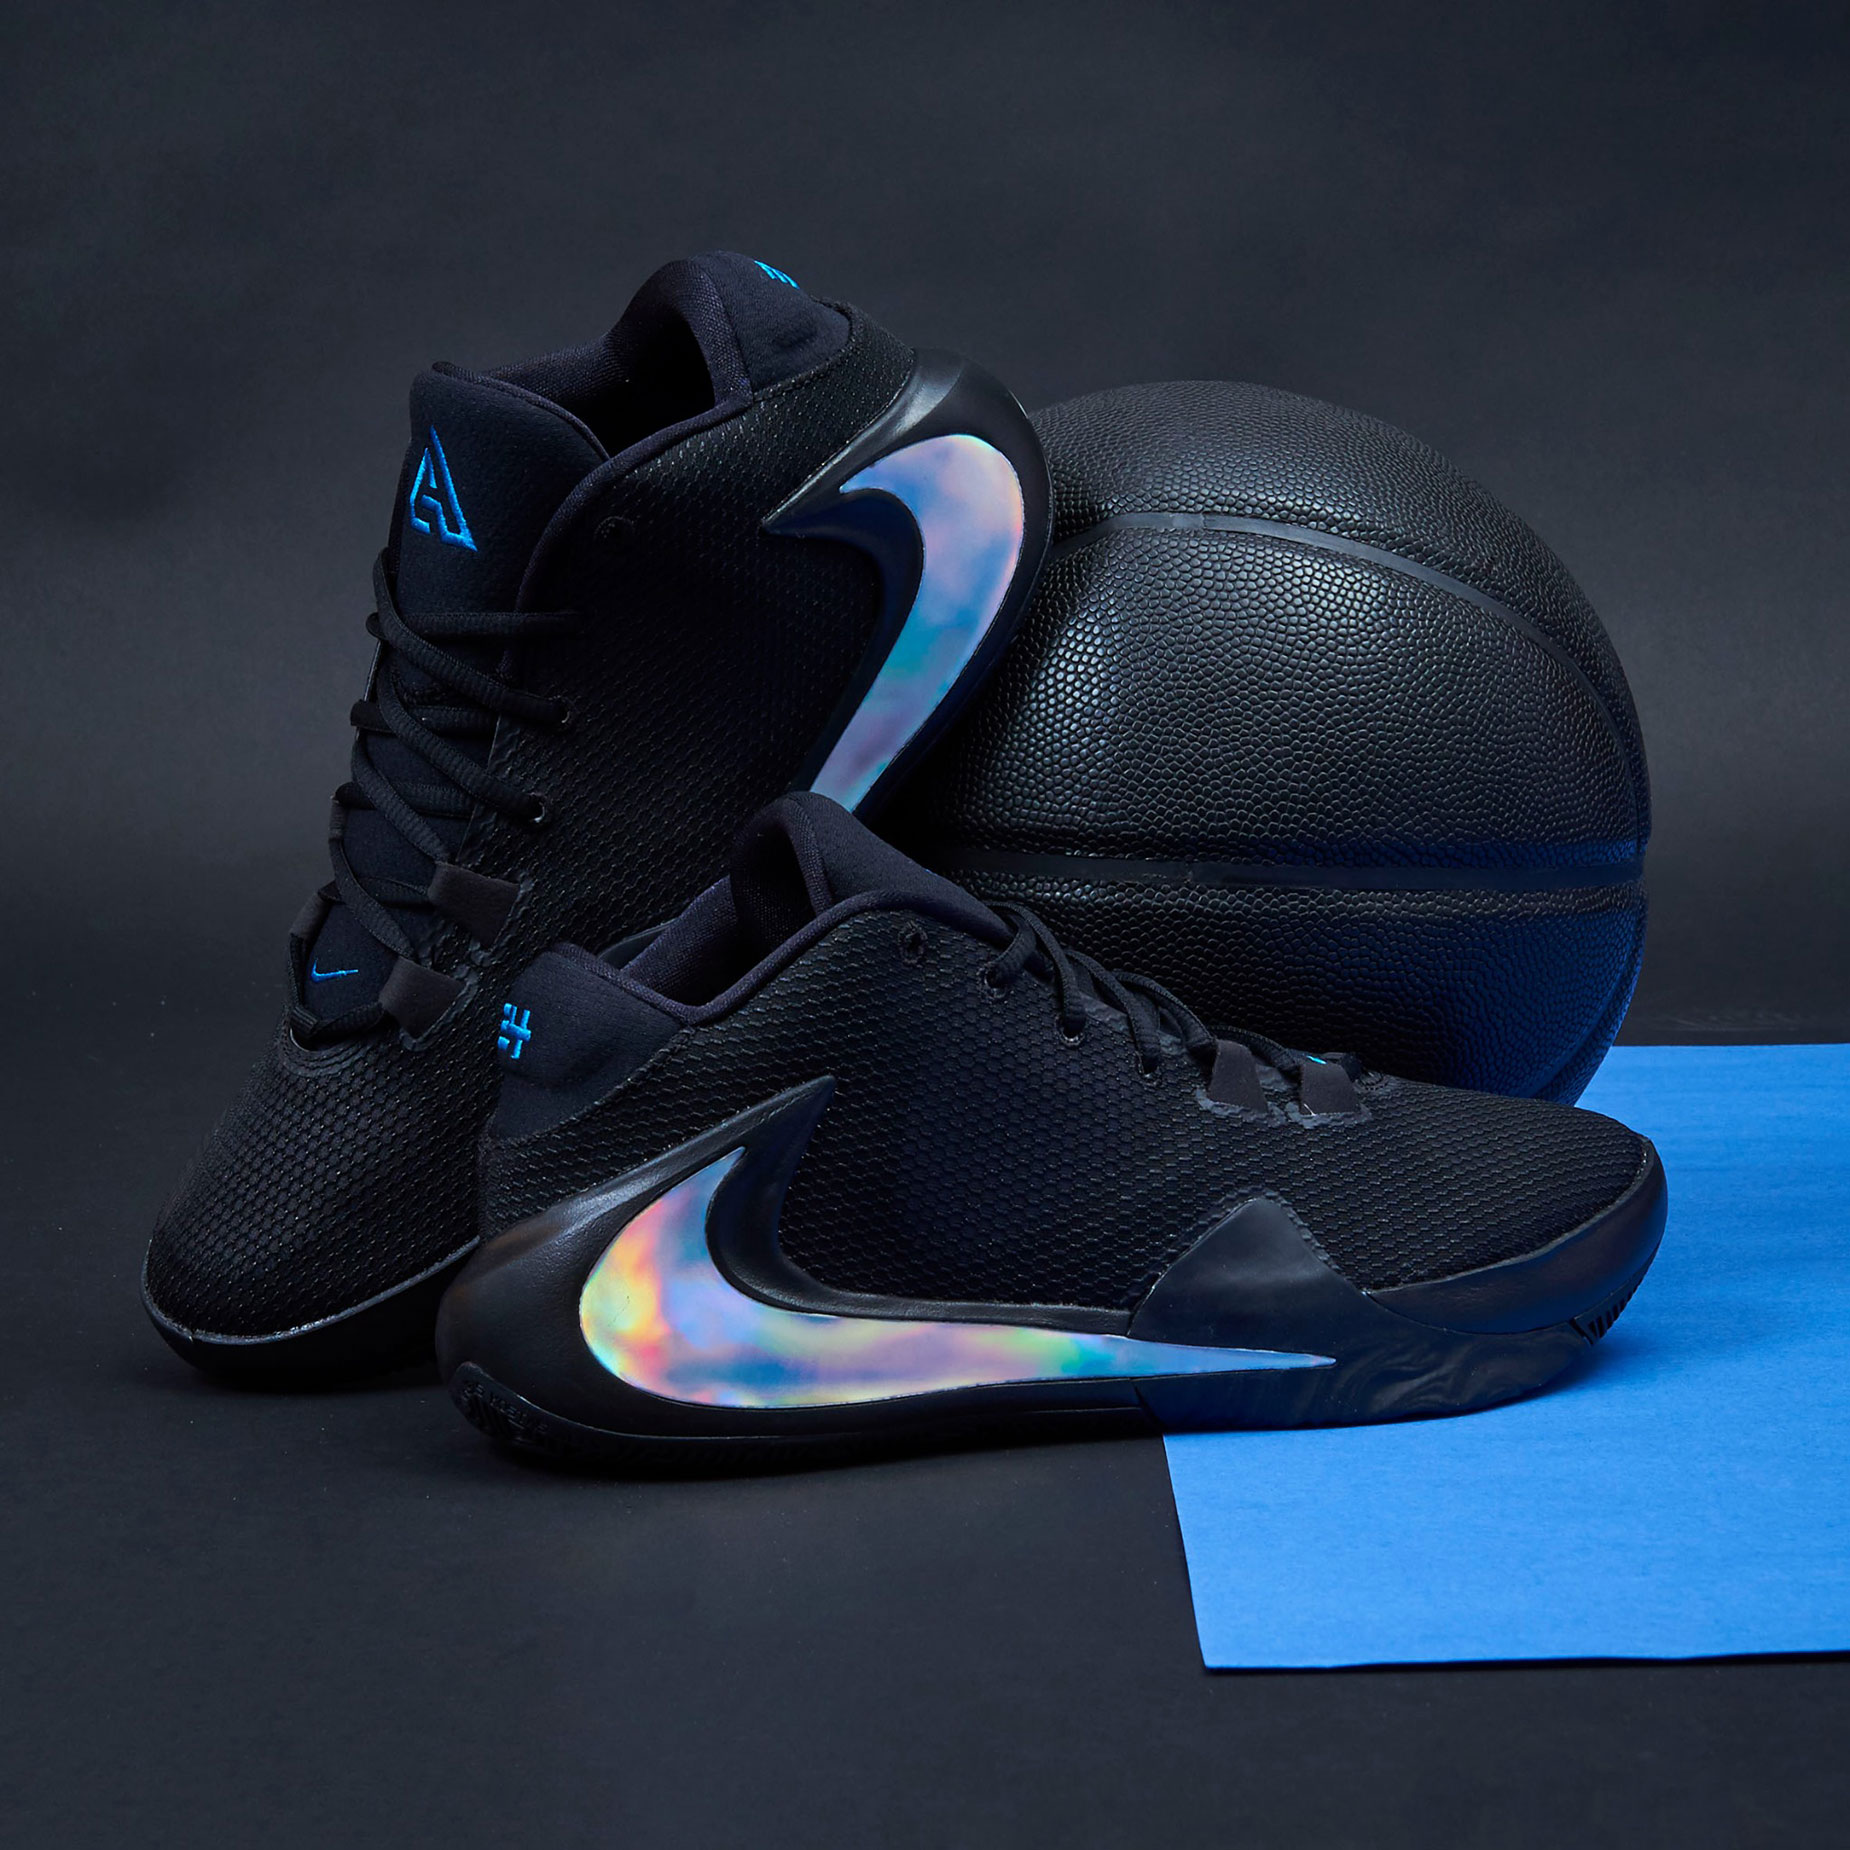 Nike Zoom Freak 1 Black Multi Color Iridescent Available Now | SneakerFits.com